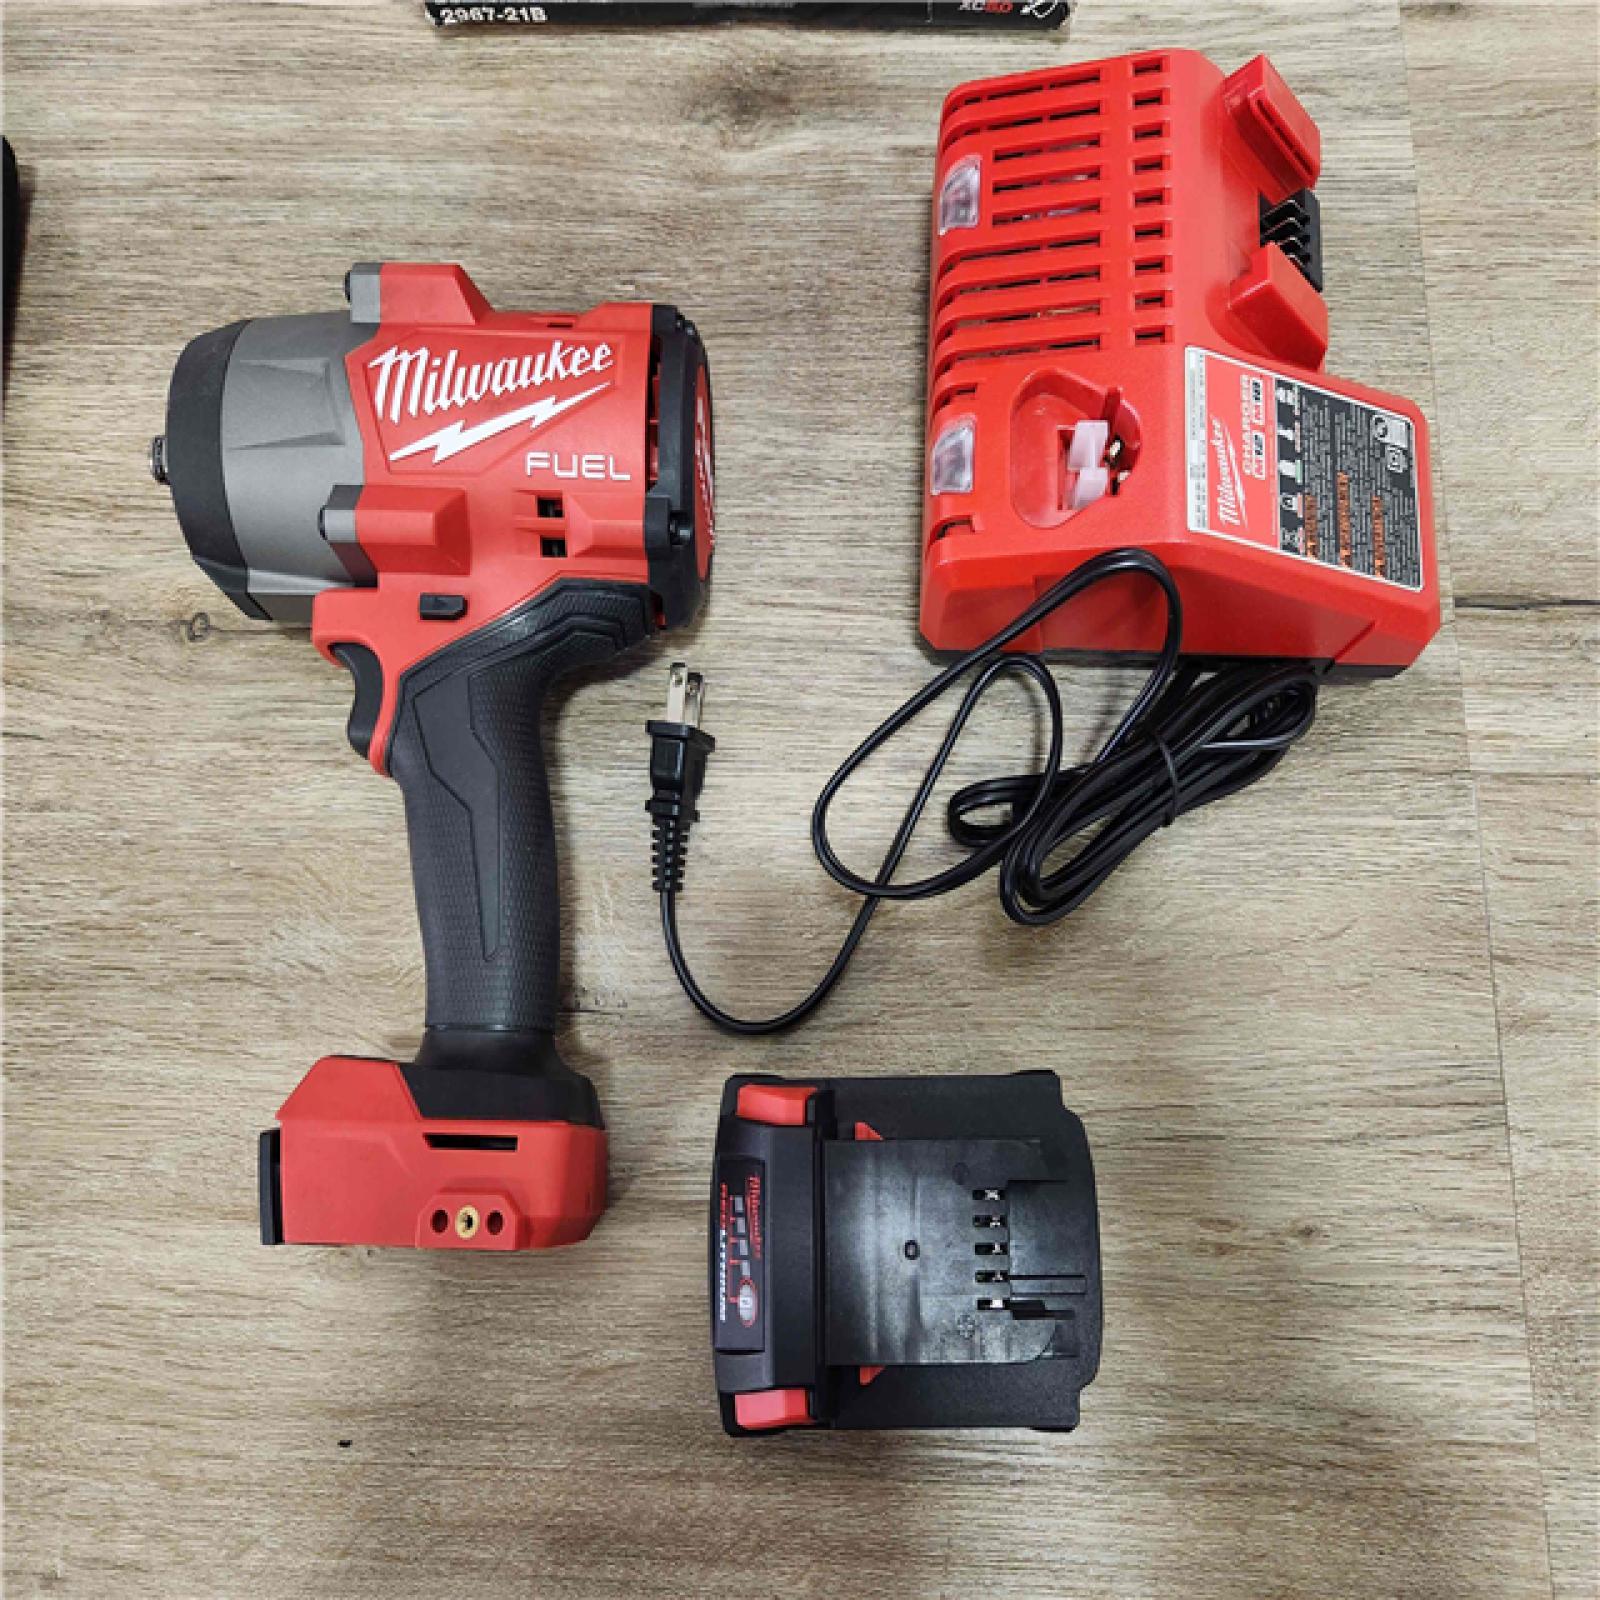 Phoenix Location Like NEW Condition Milwaukee M18 FUEL 18V Lithium-Ion Brushless Cordless 1/2 in. Impact Wrench w/Friction Ring Kit w/One 5.0 Ah Battery and Bag 2967-21